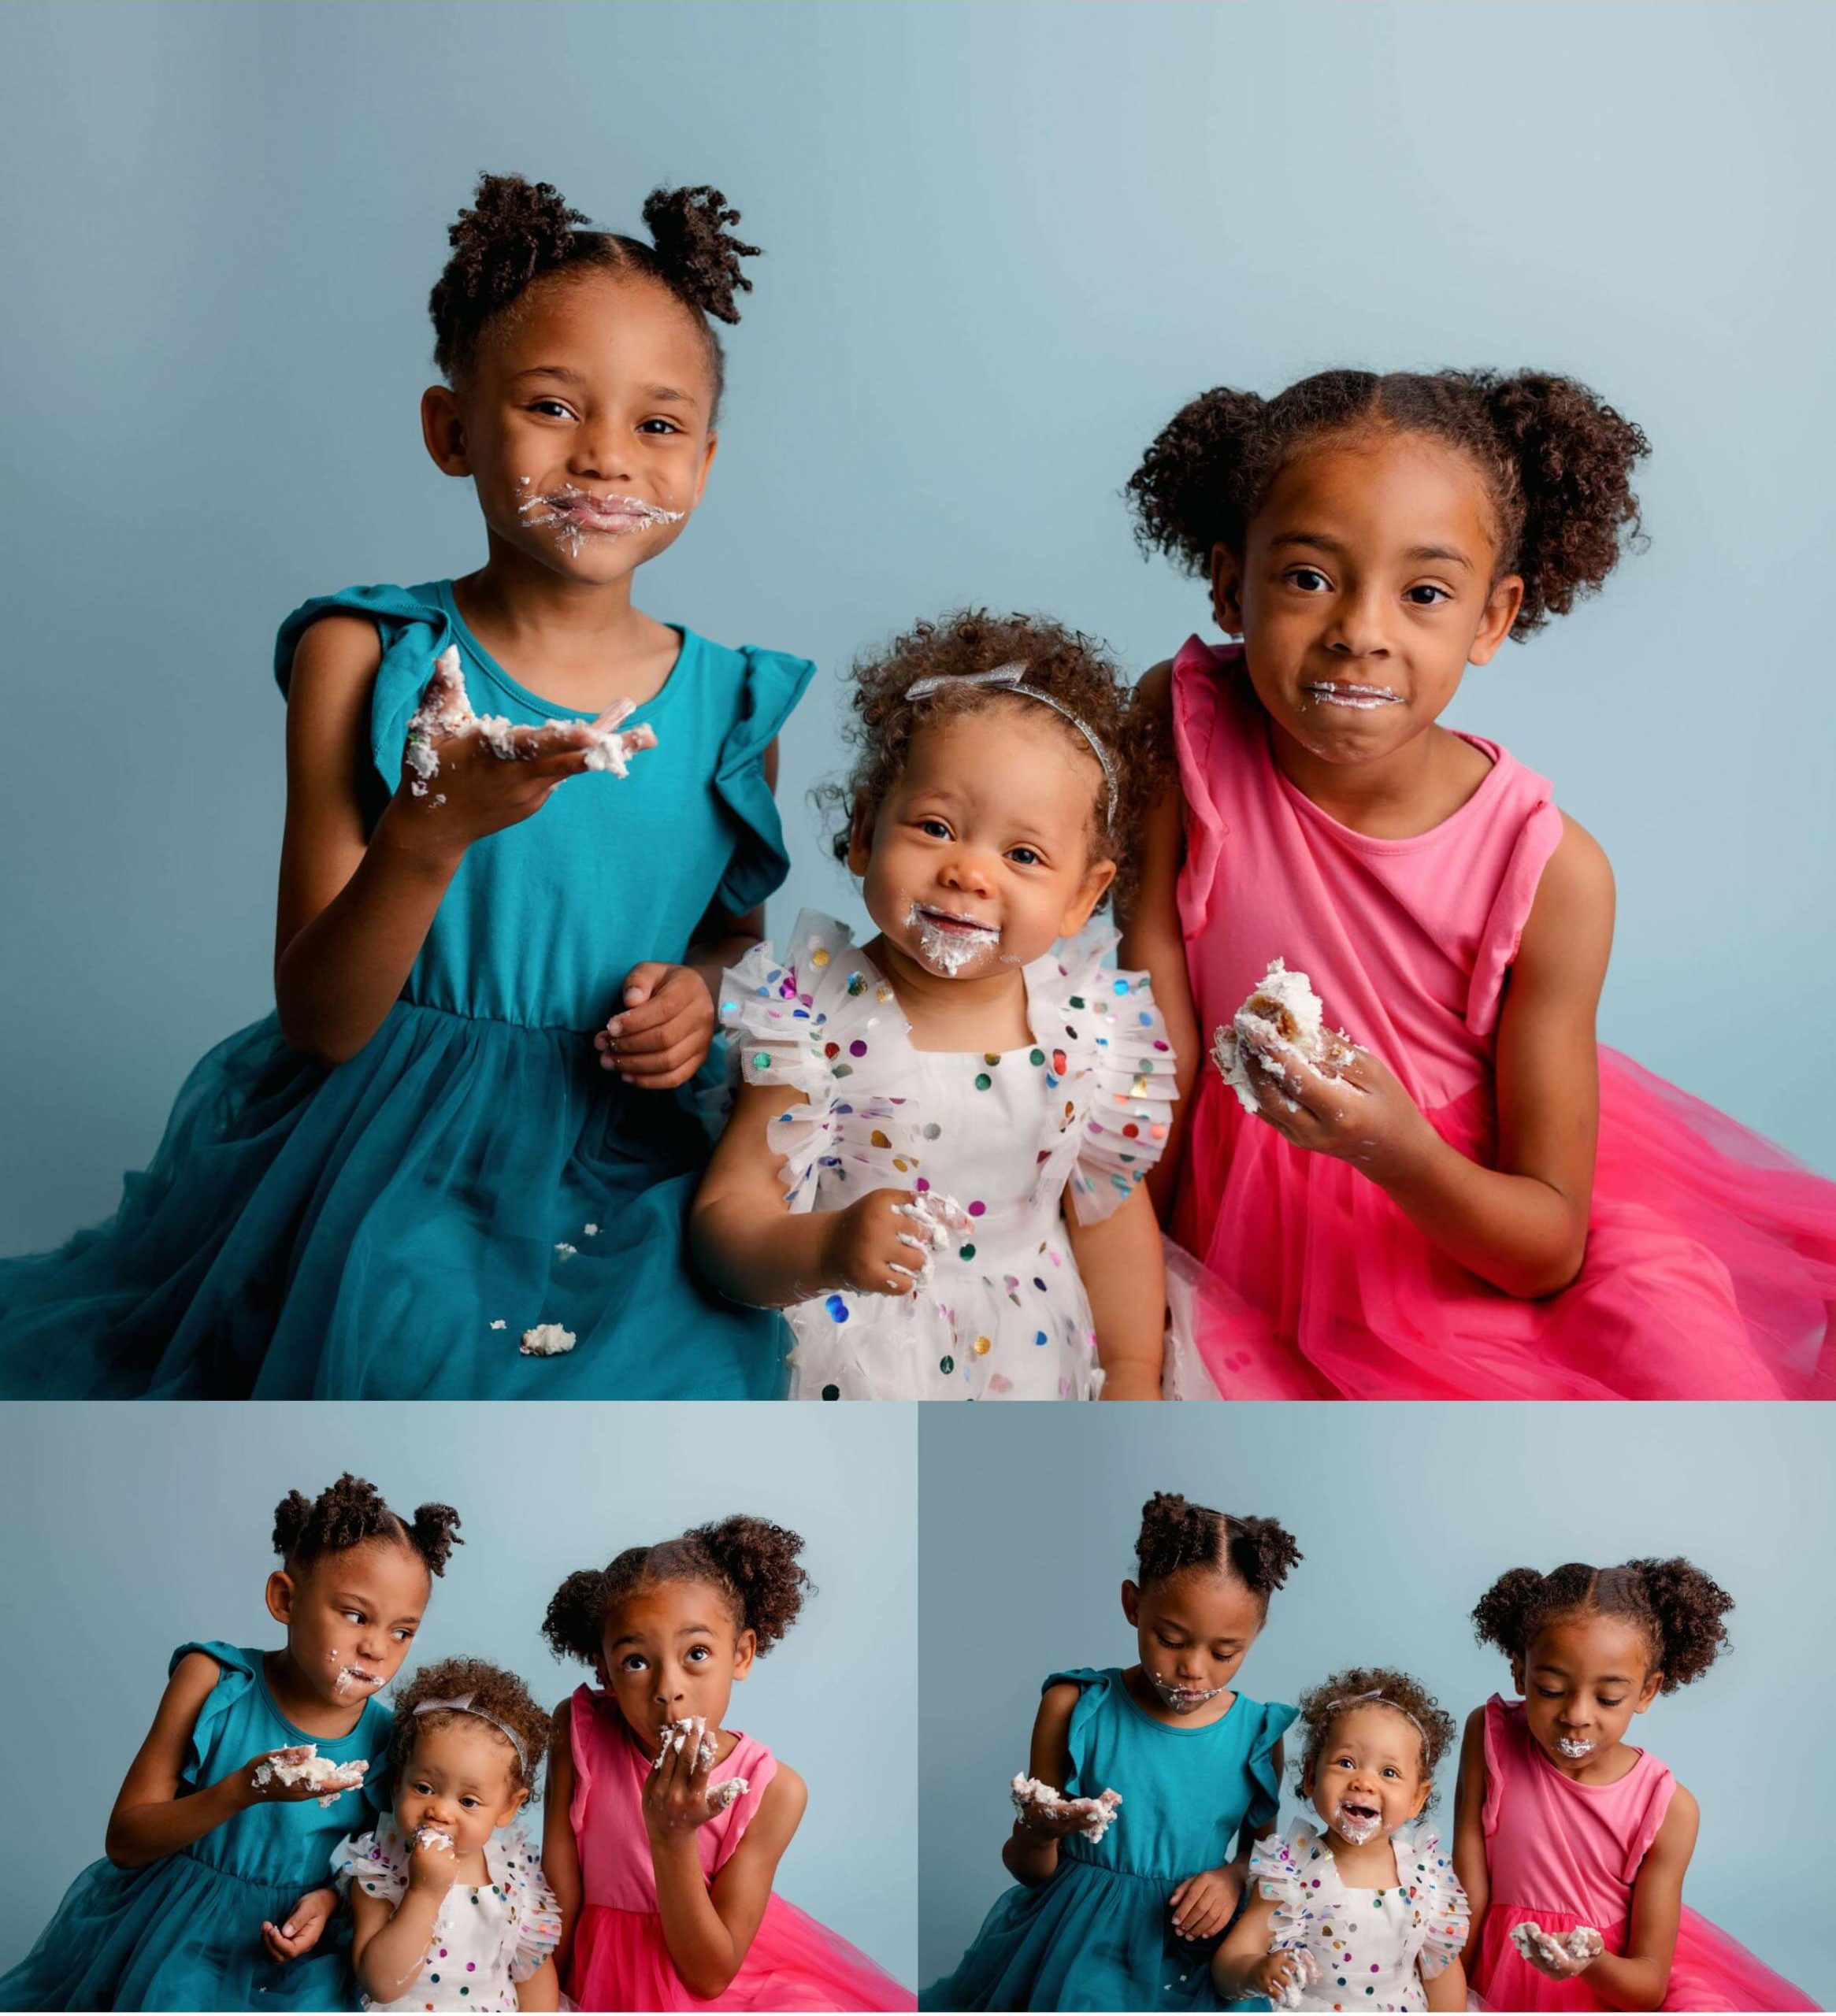 Close up images of three sisters wearing colorful outfits while eating cake during these La Mesa Studio Cake Smash Pictures. Their hands and faces are filled with cake and frosting and they're having fun and laughing